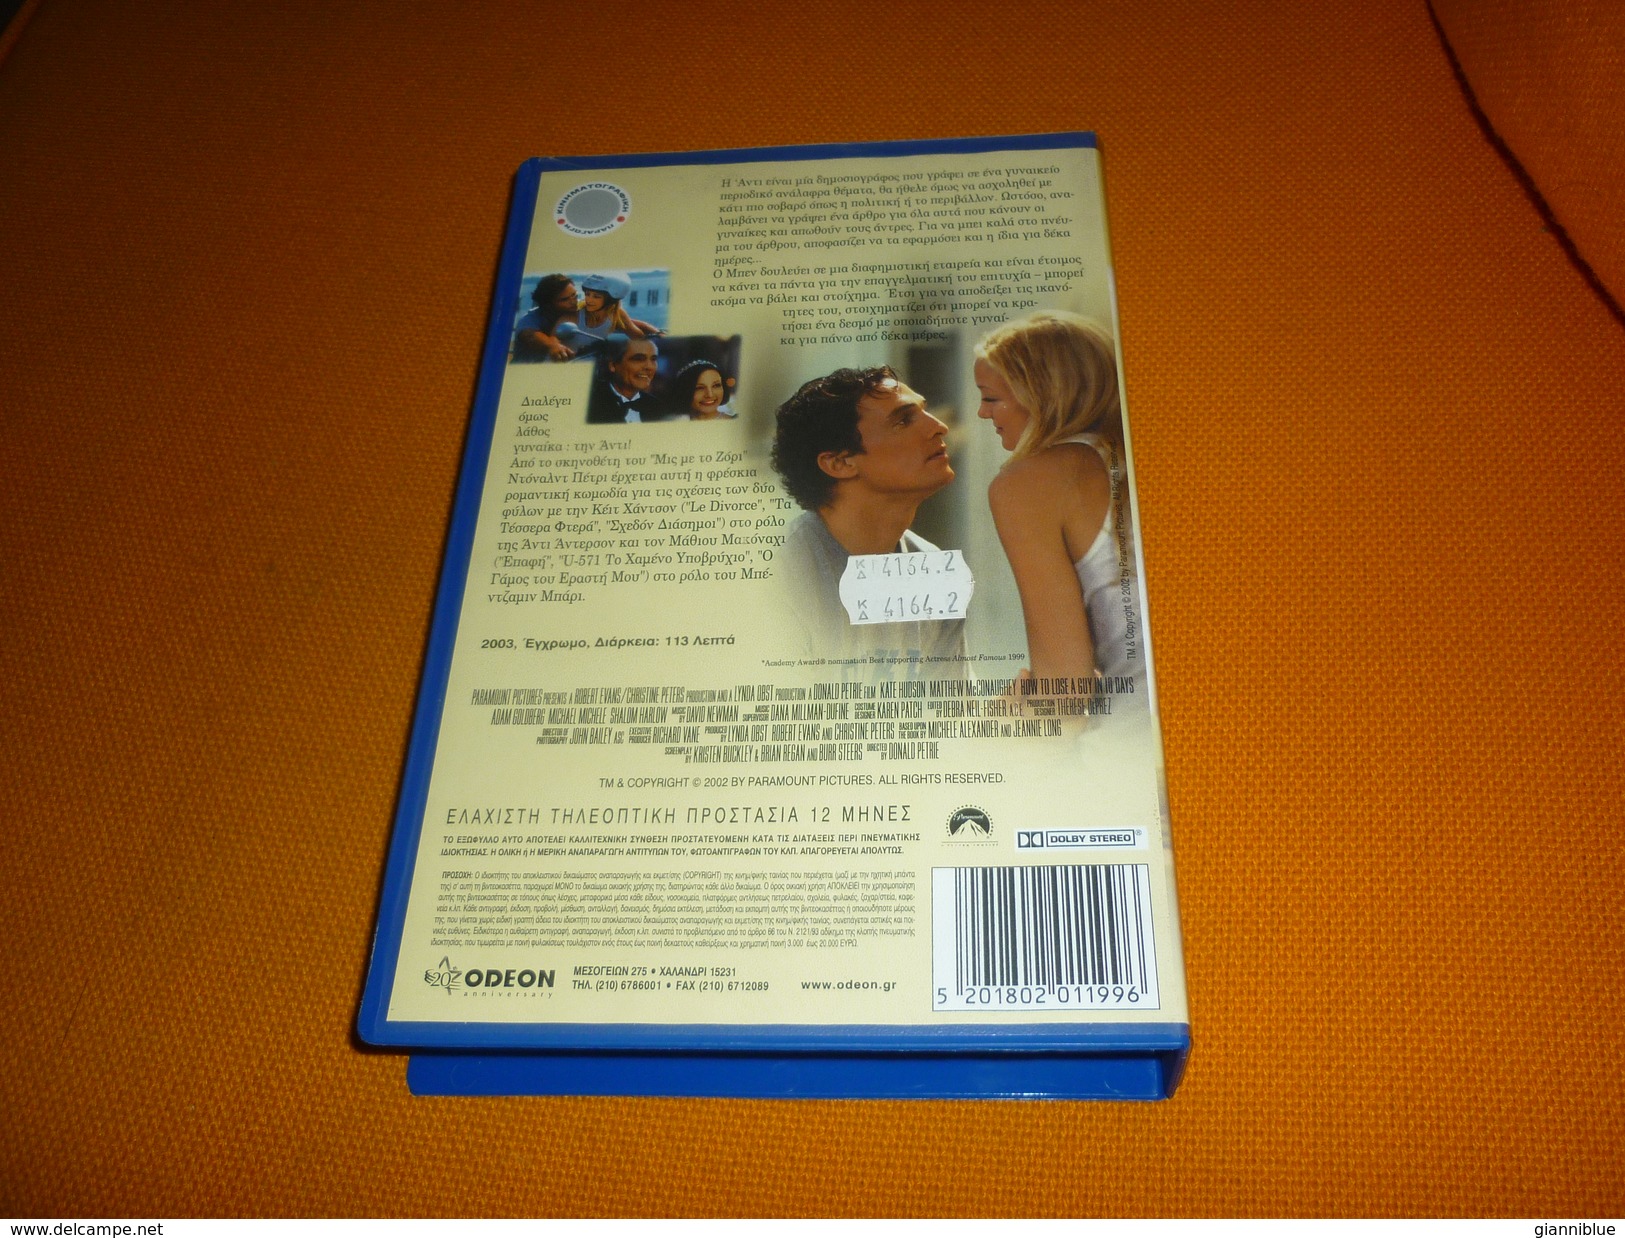 How To Lose A Guy In 10 Days Old Greek Vhs Cassette Tape From Greece - Romantique